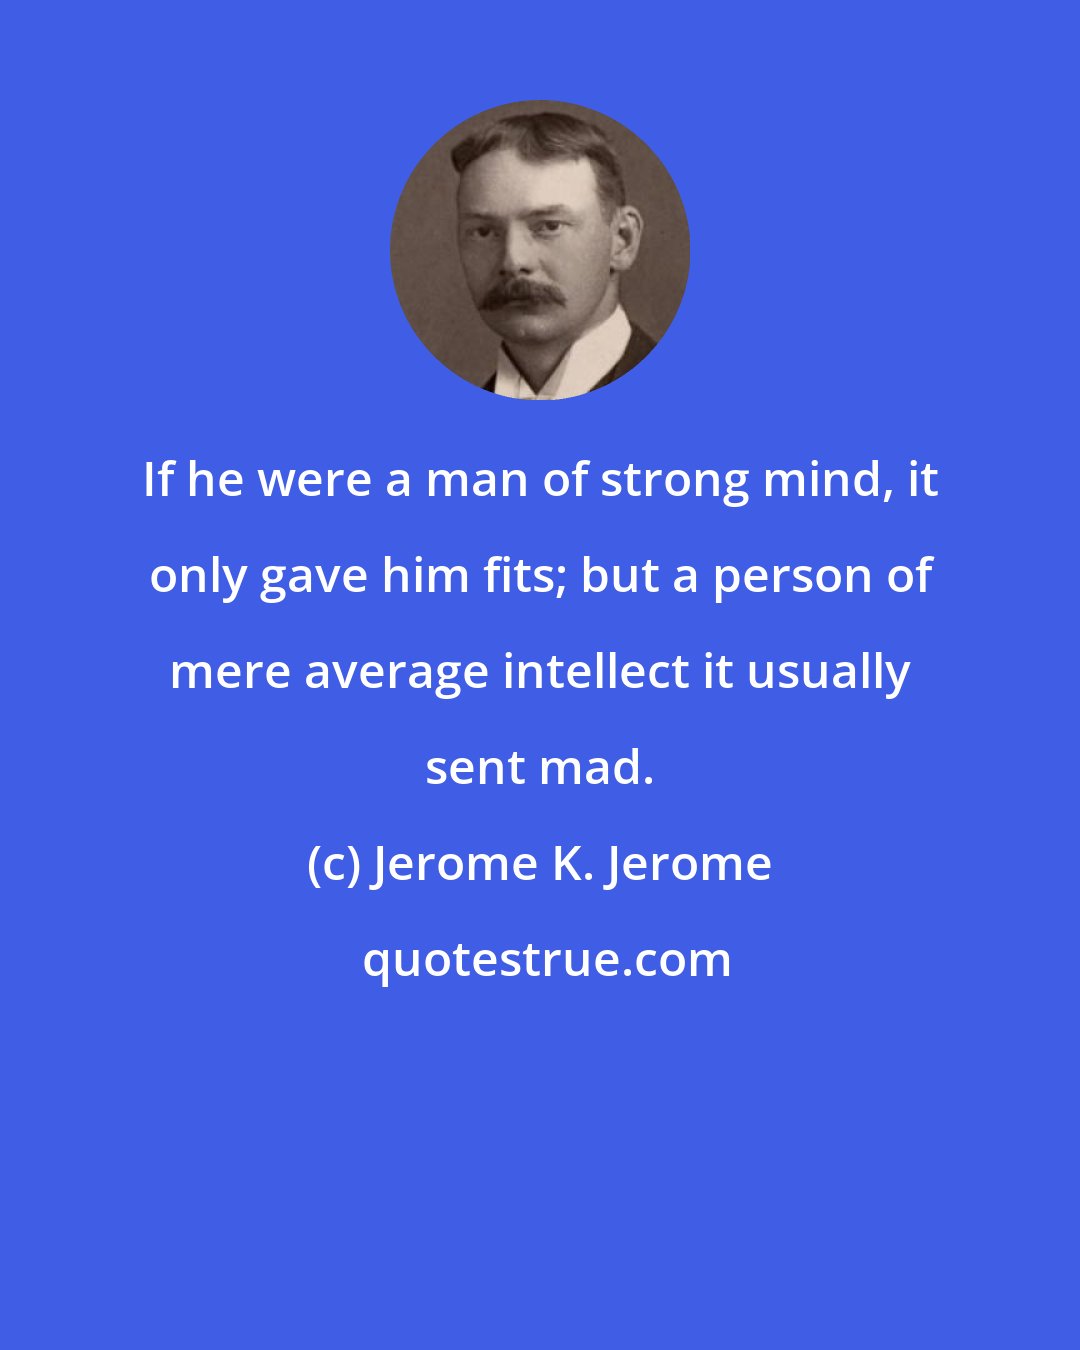 Jerome K. Jerome: If he were a man of strong mind, it only gave him fits; but a person of mere average intellect it usually sent mad.